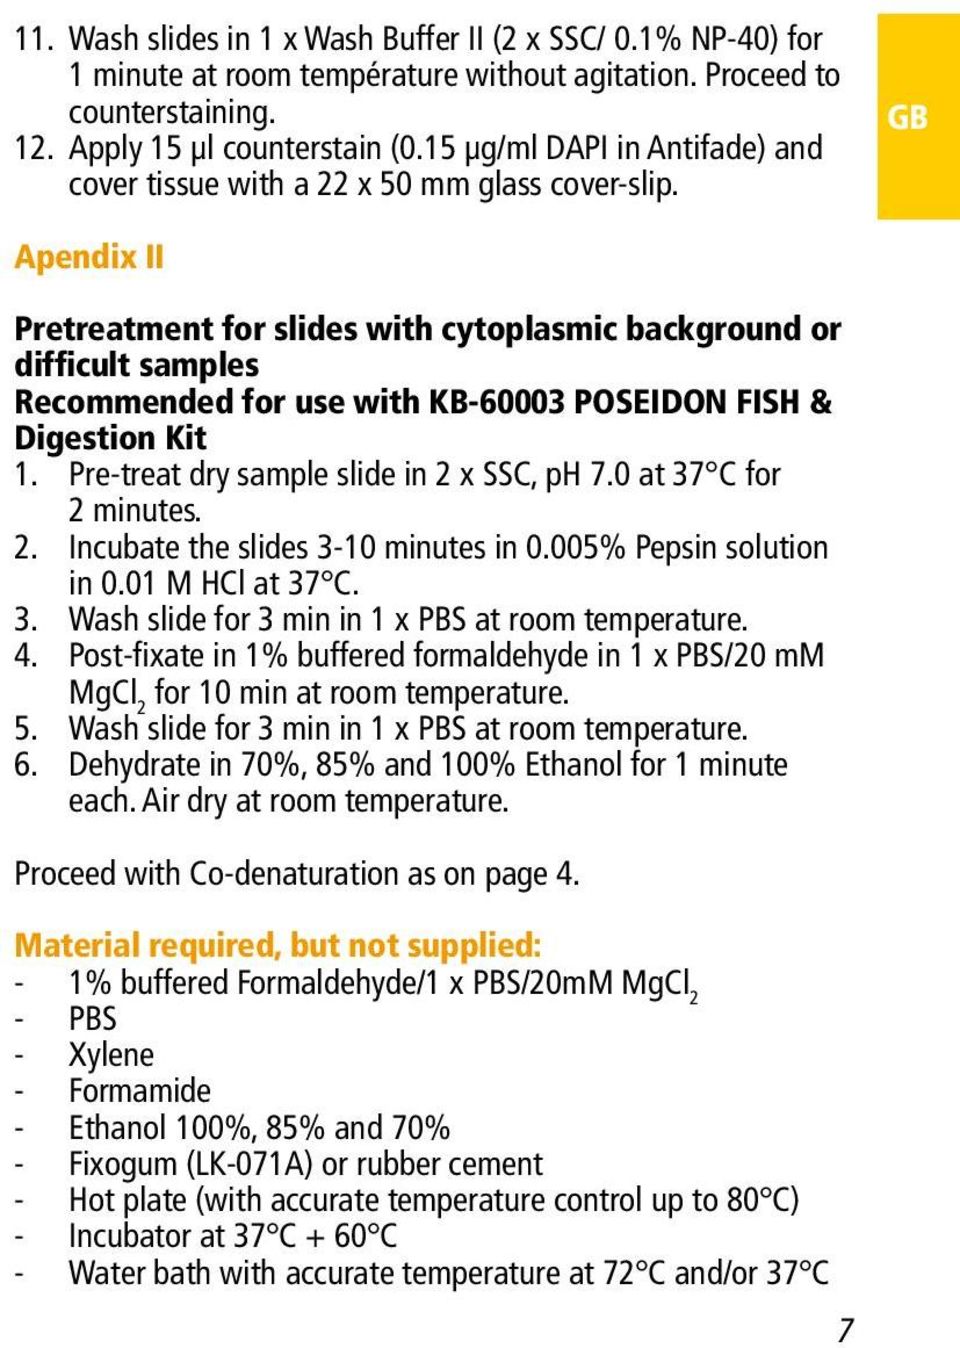 GB Apendix II Pretreatment for slides with cytoplasmic background or difficult samples Recommended for use with KB-60003 POSEIDON FISH & Digestion Kit 1. Pre-treat dry sample slide in 2 x SSC, ph 7.